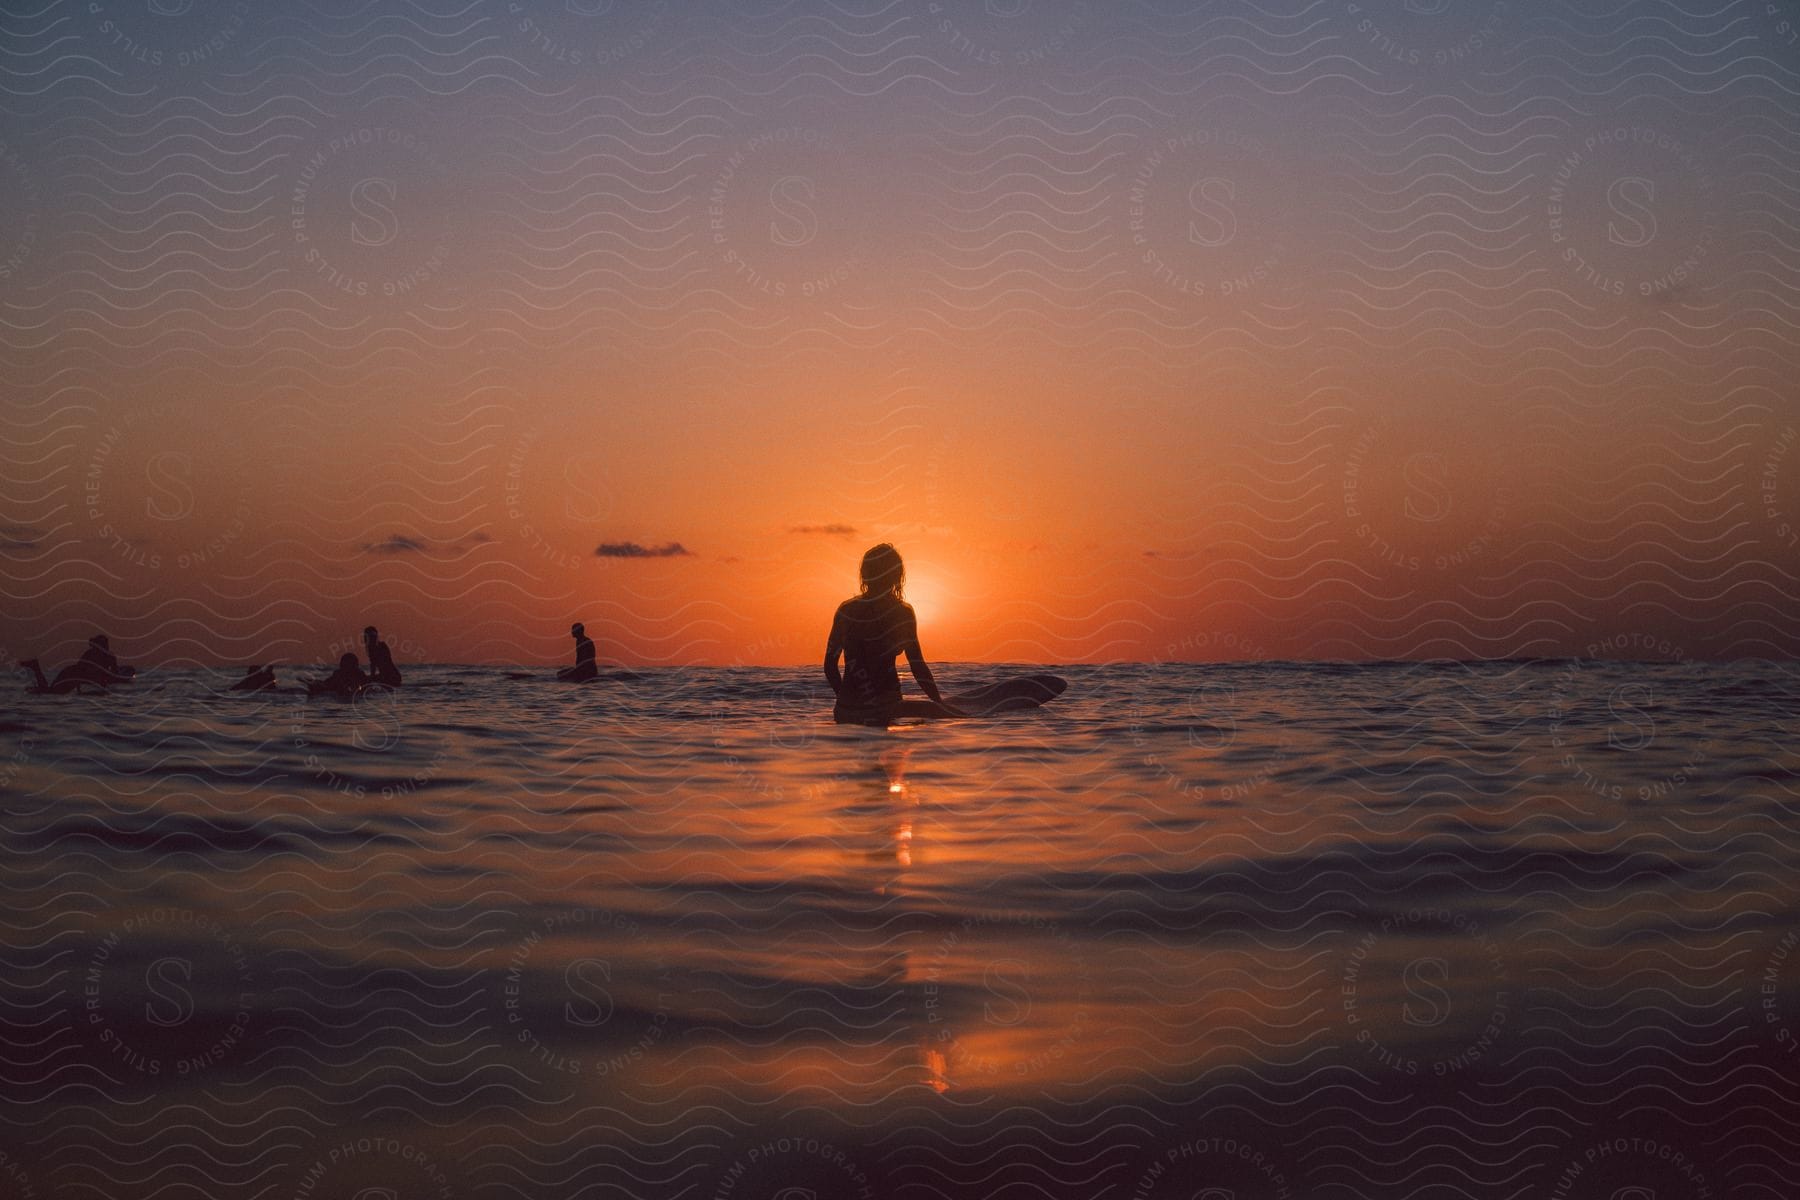 A group of people on surfboards out in the ocean at sunset